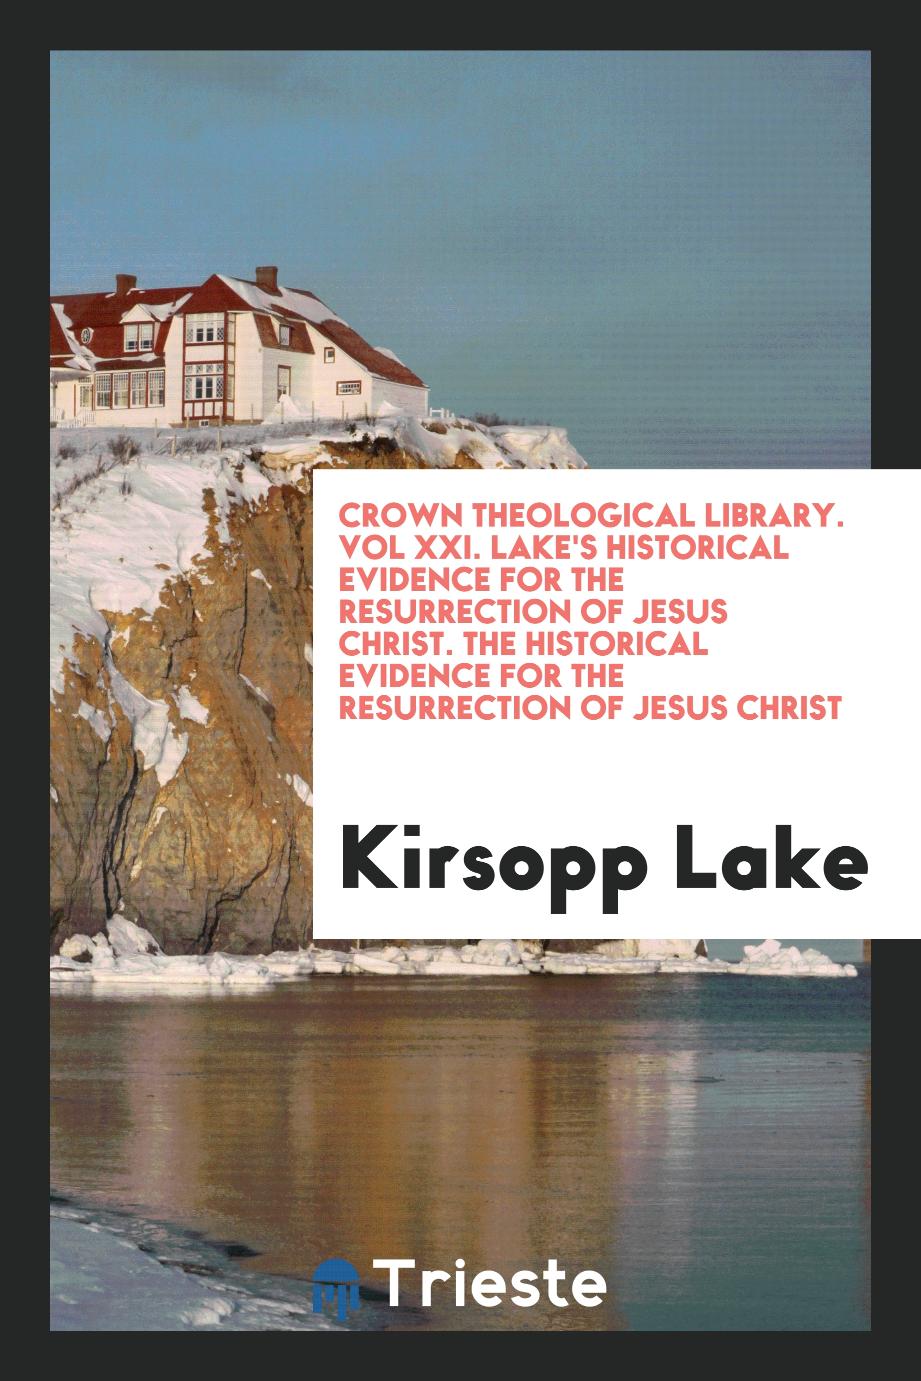 Crown Theological Library. Vol XXI. Lake's Historical Evidence for the Resurrection of Jesus Christ. The Historical Evidence for the Resurrection of Jesus Christ